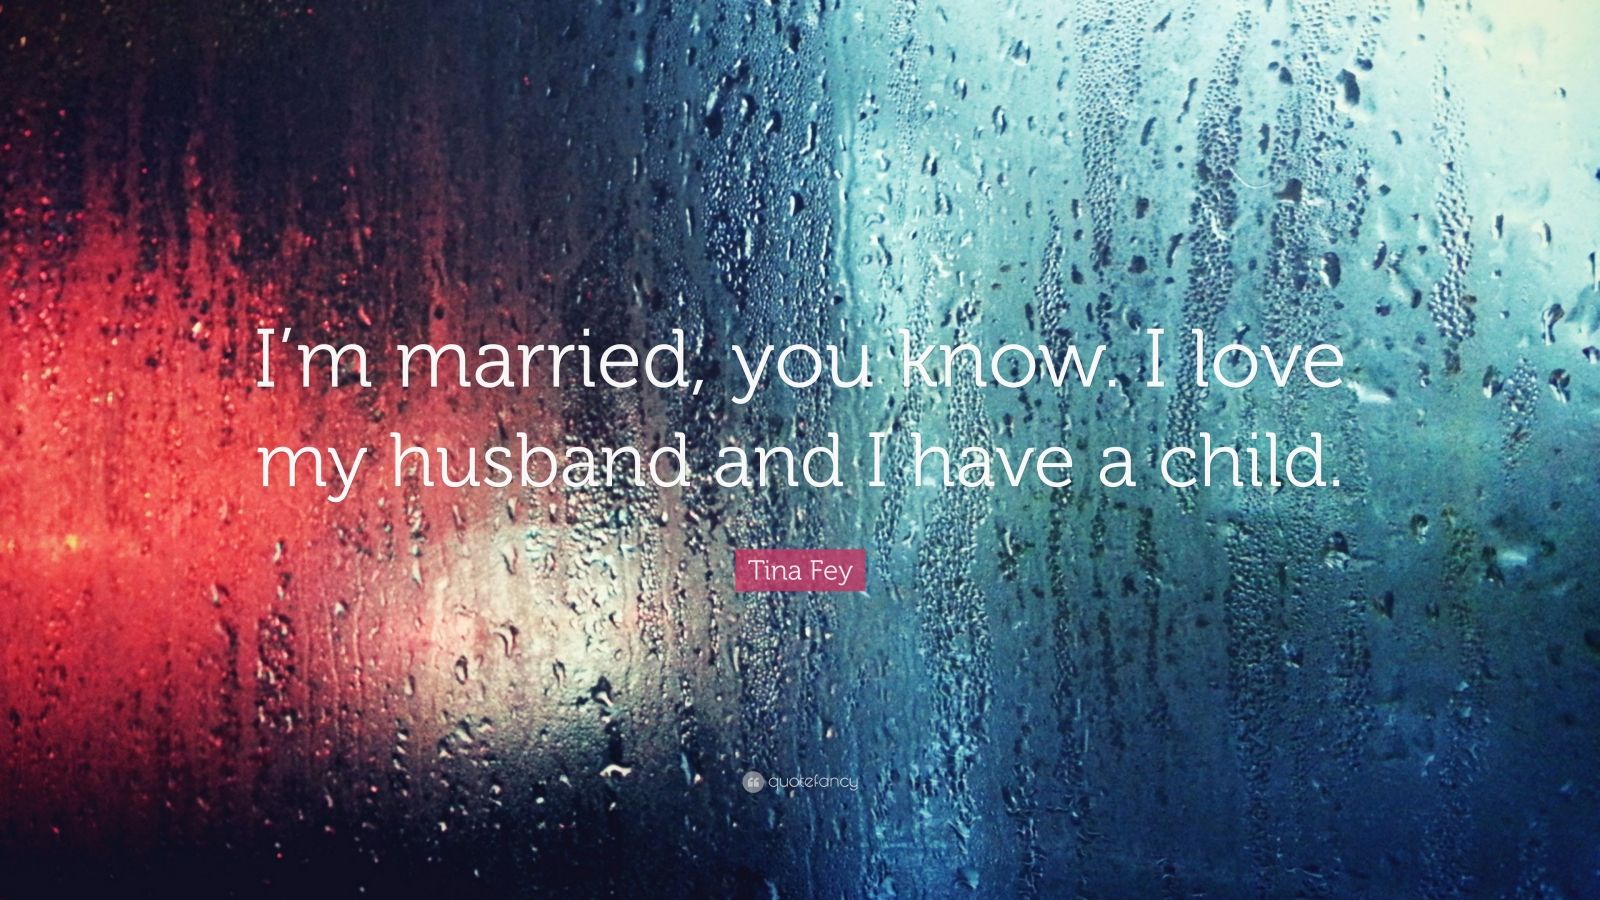 Tina Fey Quote: "I'm married, you know. I love my husband ...